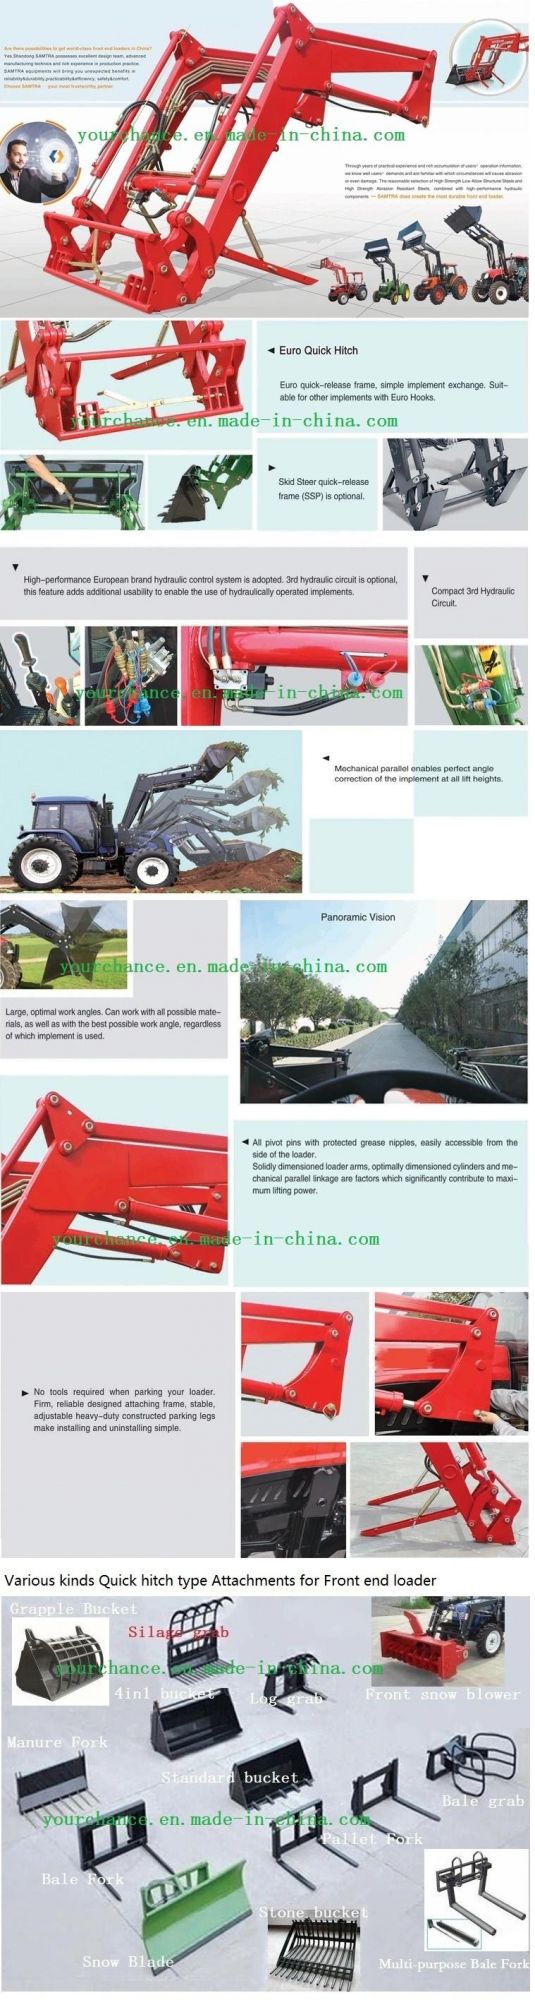 High Quality CE Certificate Tz16D Europe Quick Hitch Type 140-210HP Big Wheel Tractor Mounted Front End Loader with 4 in 1 Combine Bucket Made in China Factory